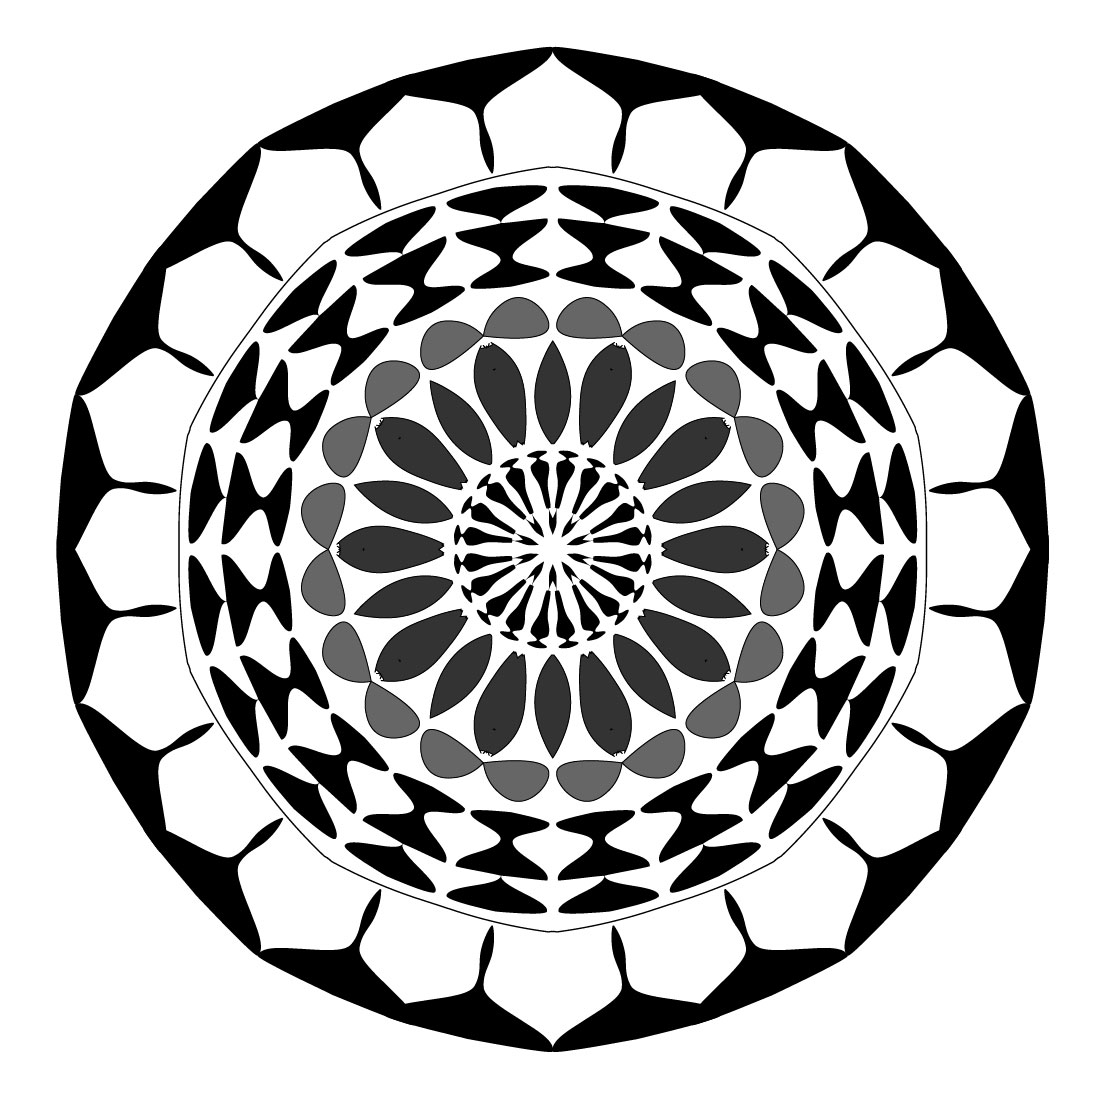 Mandala-Art-with-lotus-flower-in-black-and-white preview image.